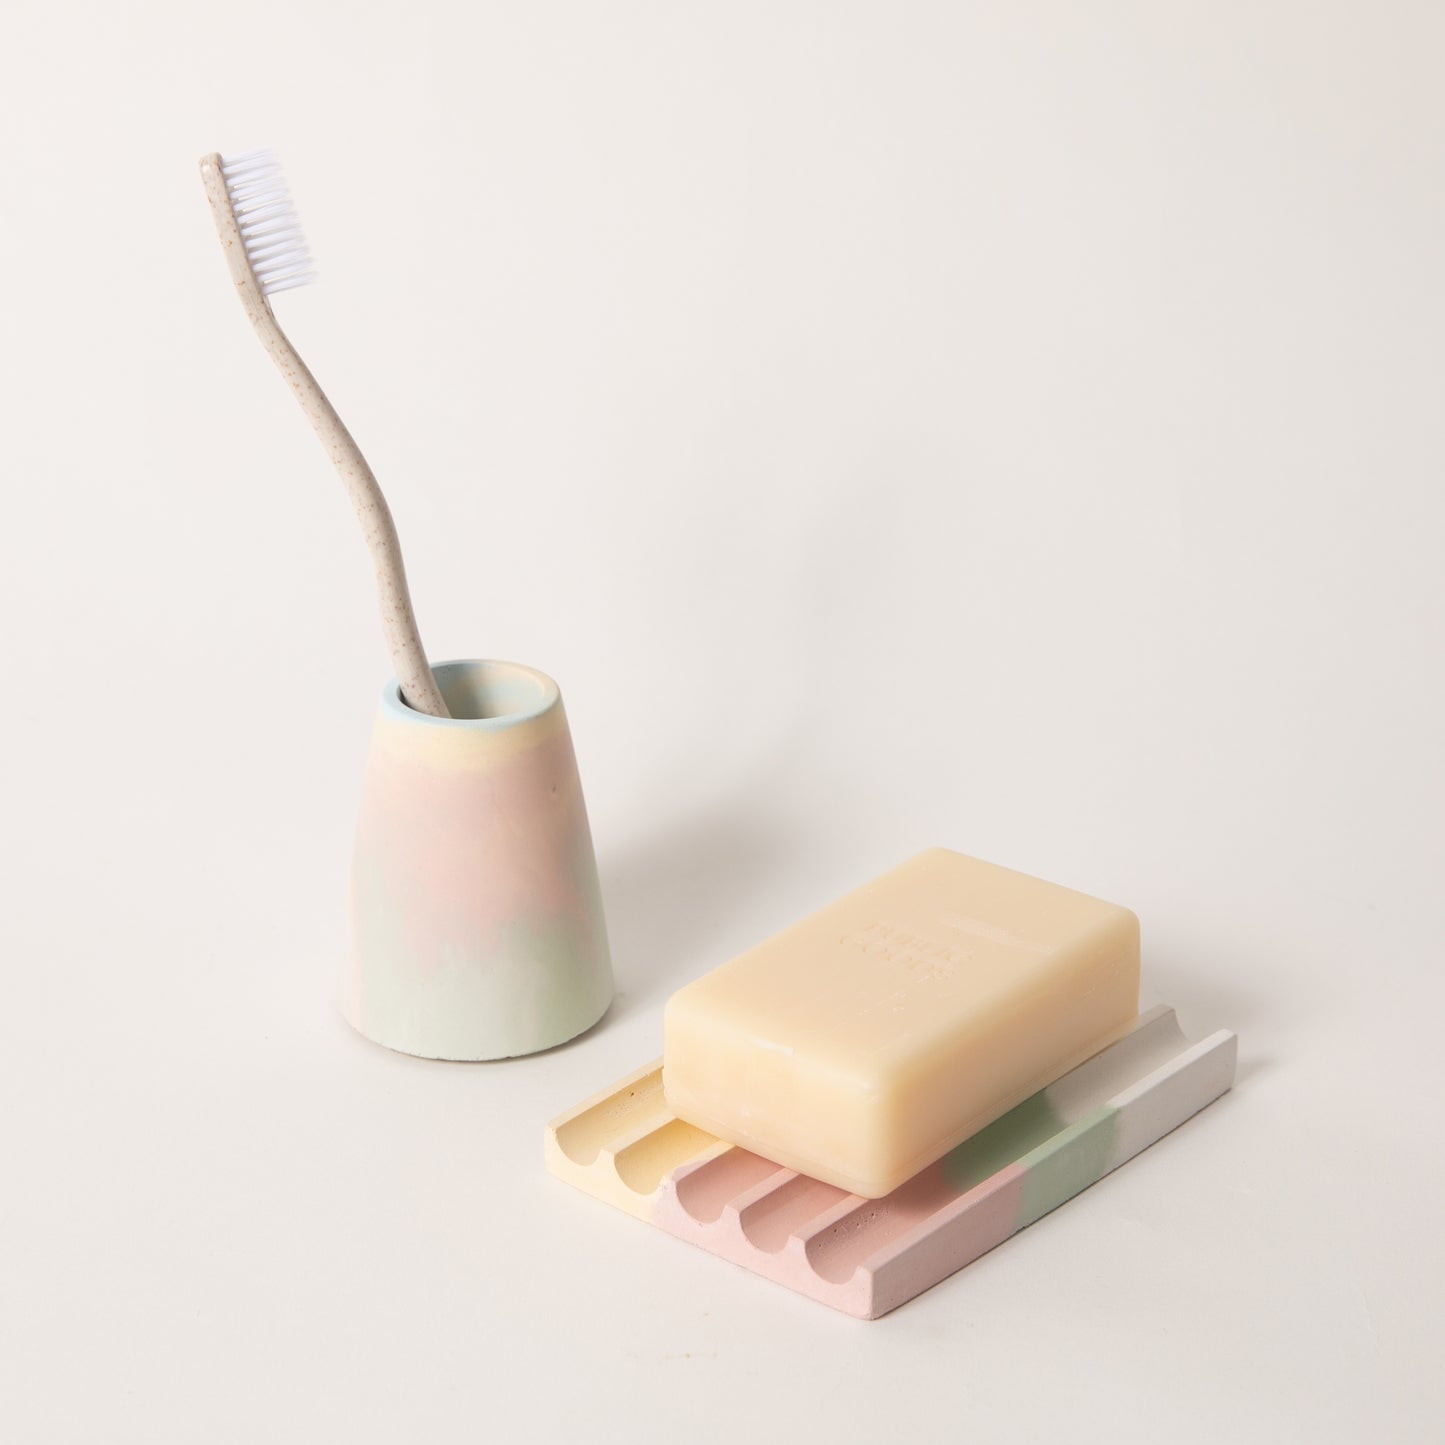 Jawbreaker toothbrush holder & soap dish set, styled with a toothbrush & bar of soap.